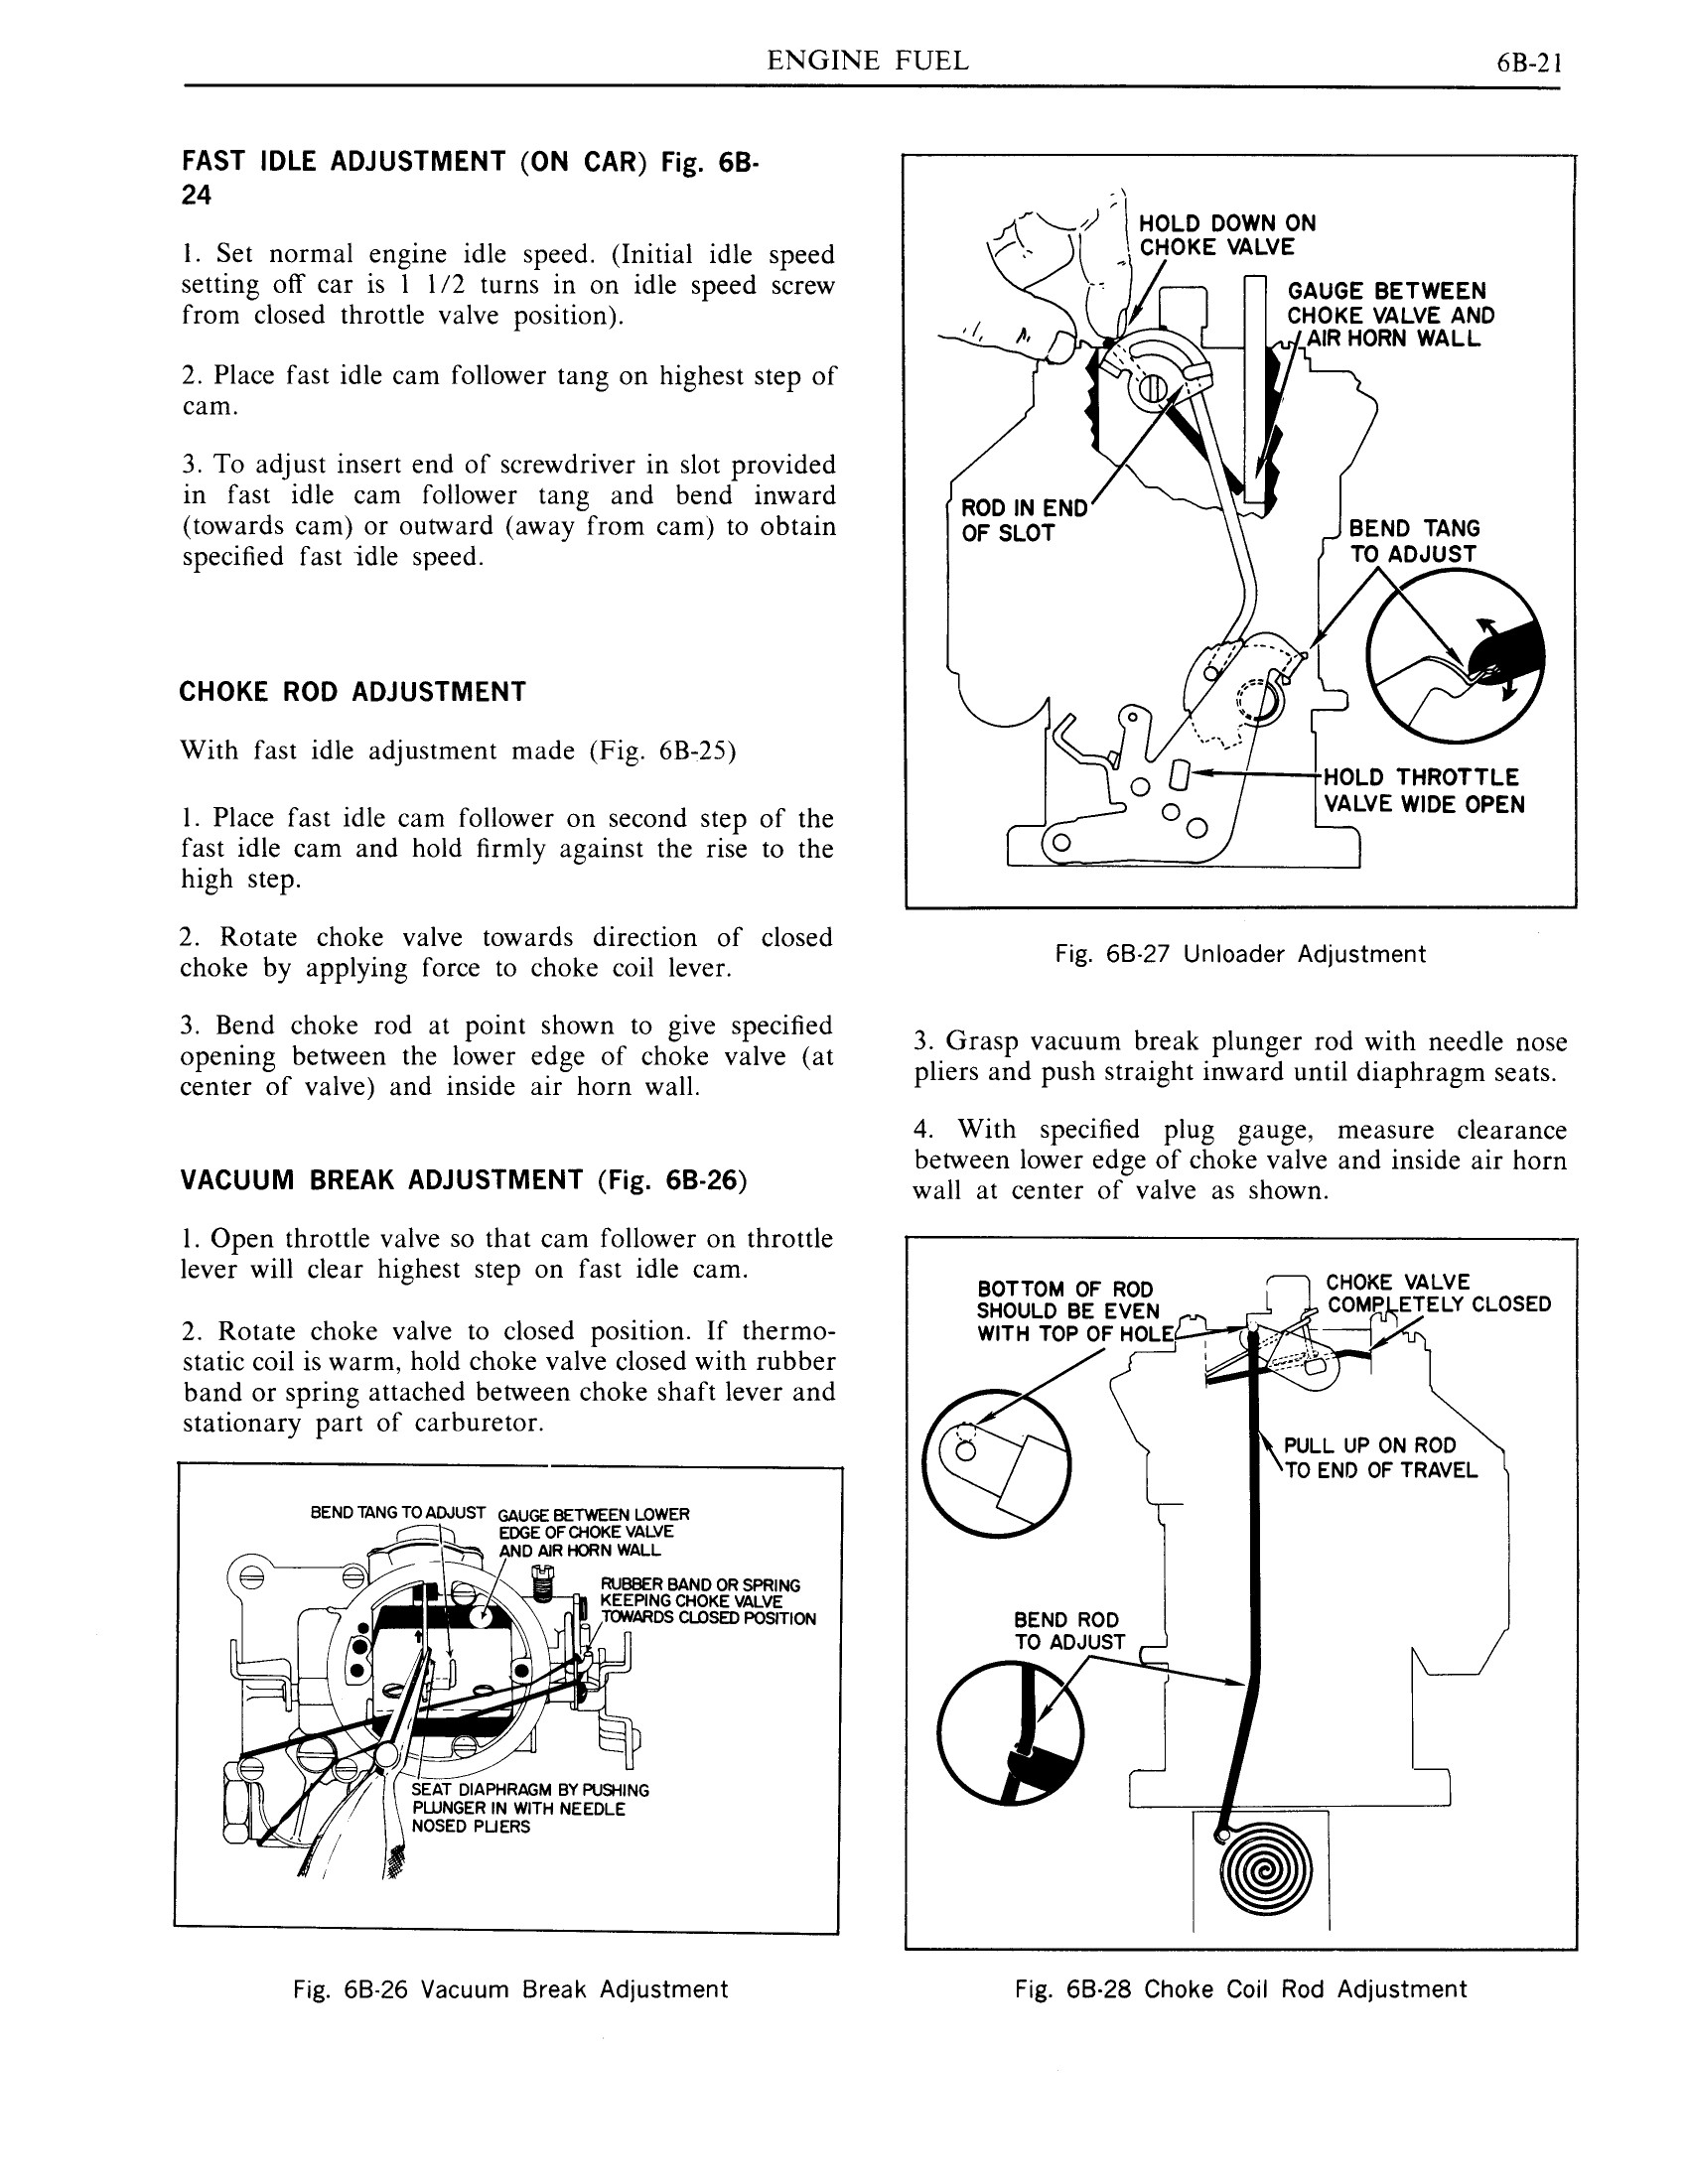 1970 Pontiac Chassis Service Manual - Engine Fuel Page 21 of 65